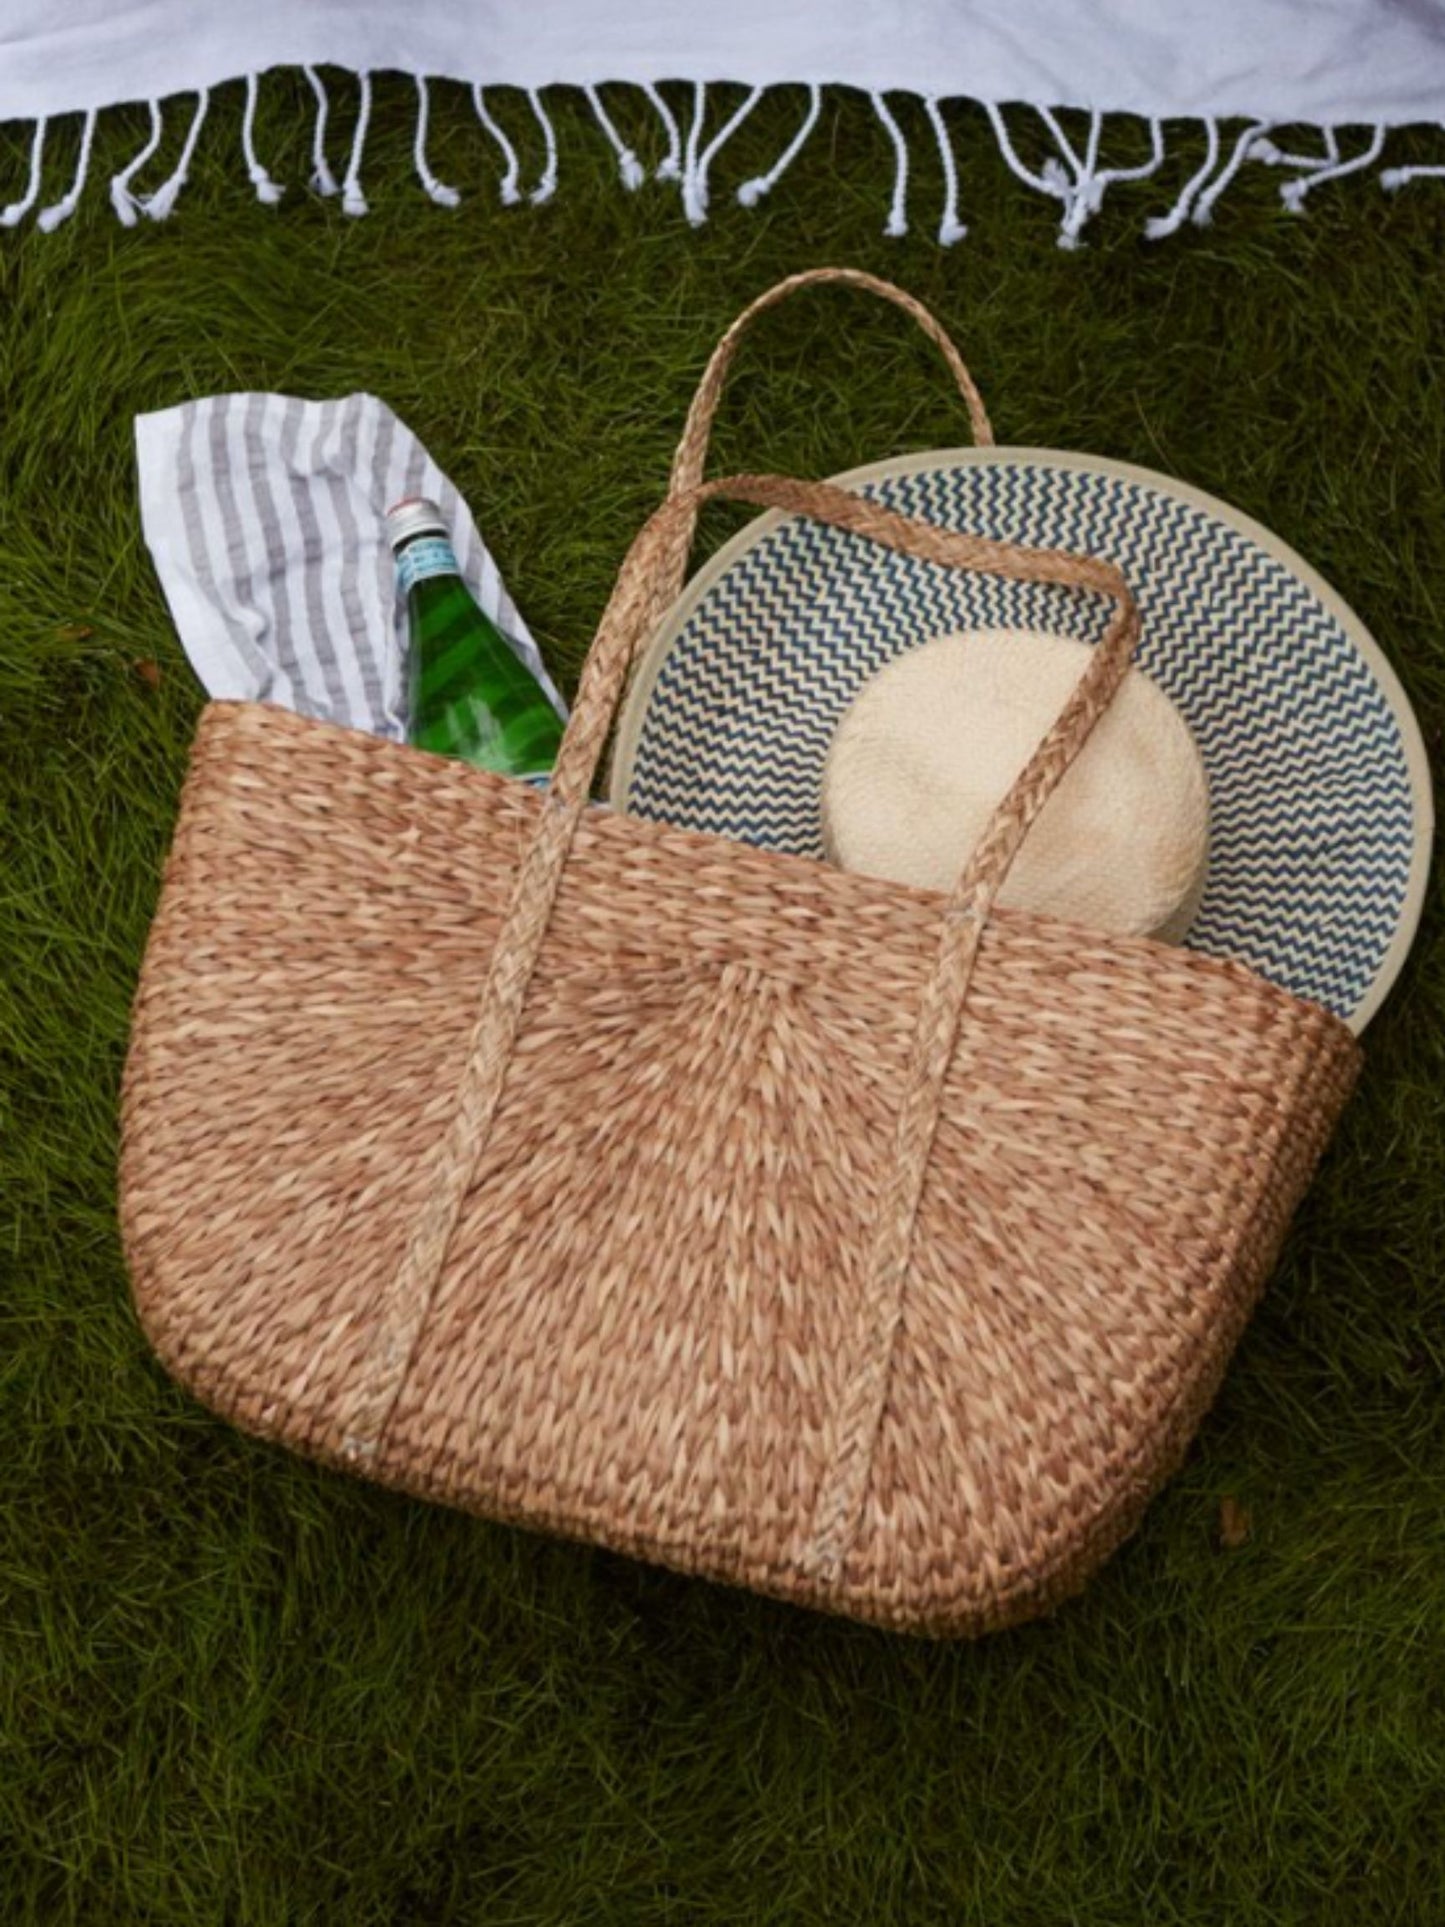 Lagom Seagrass Bag (PICK UP ONLY)